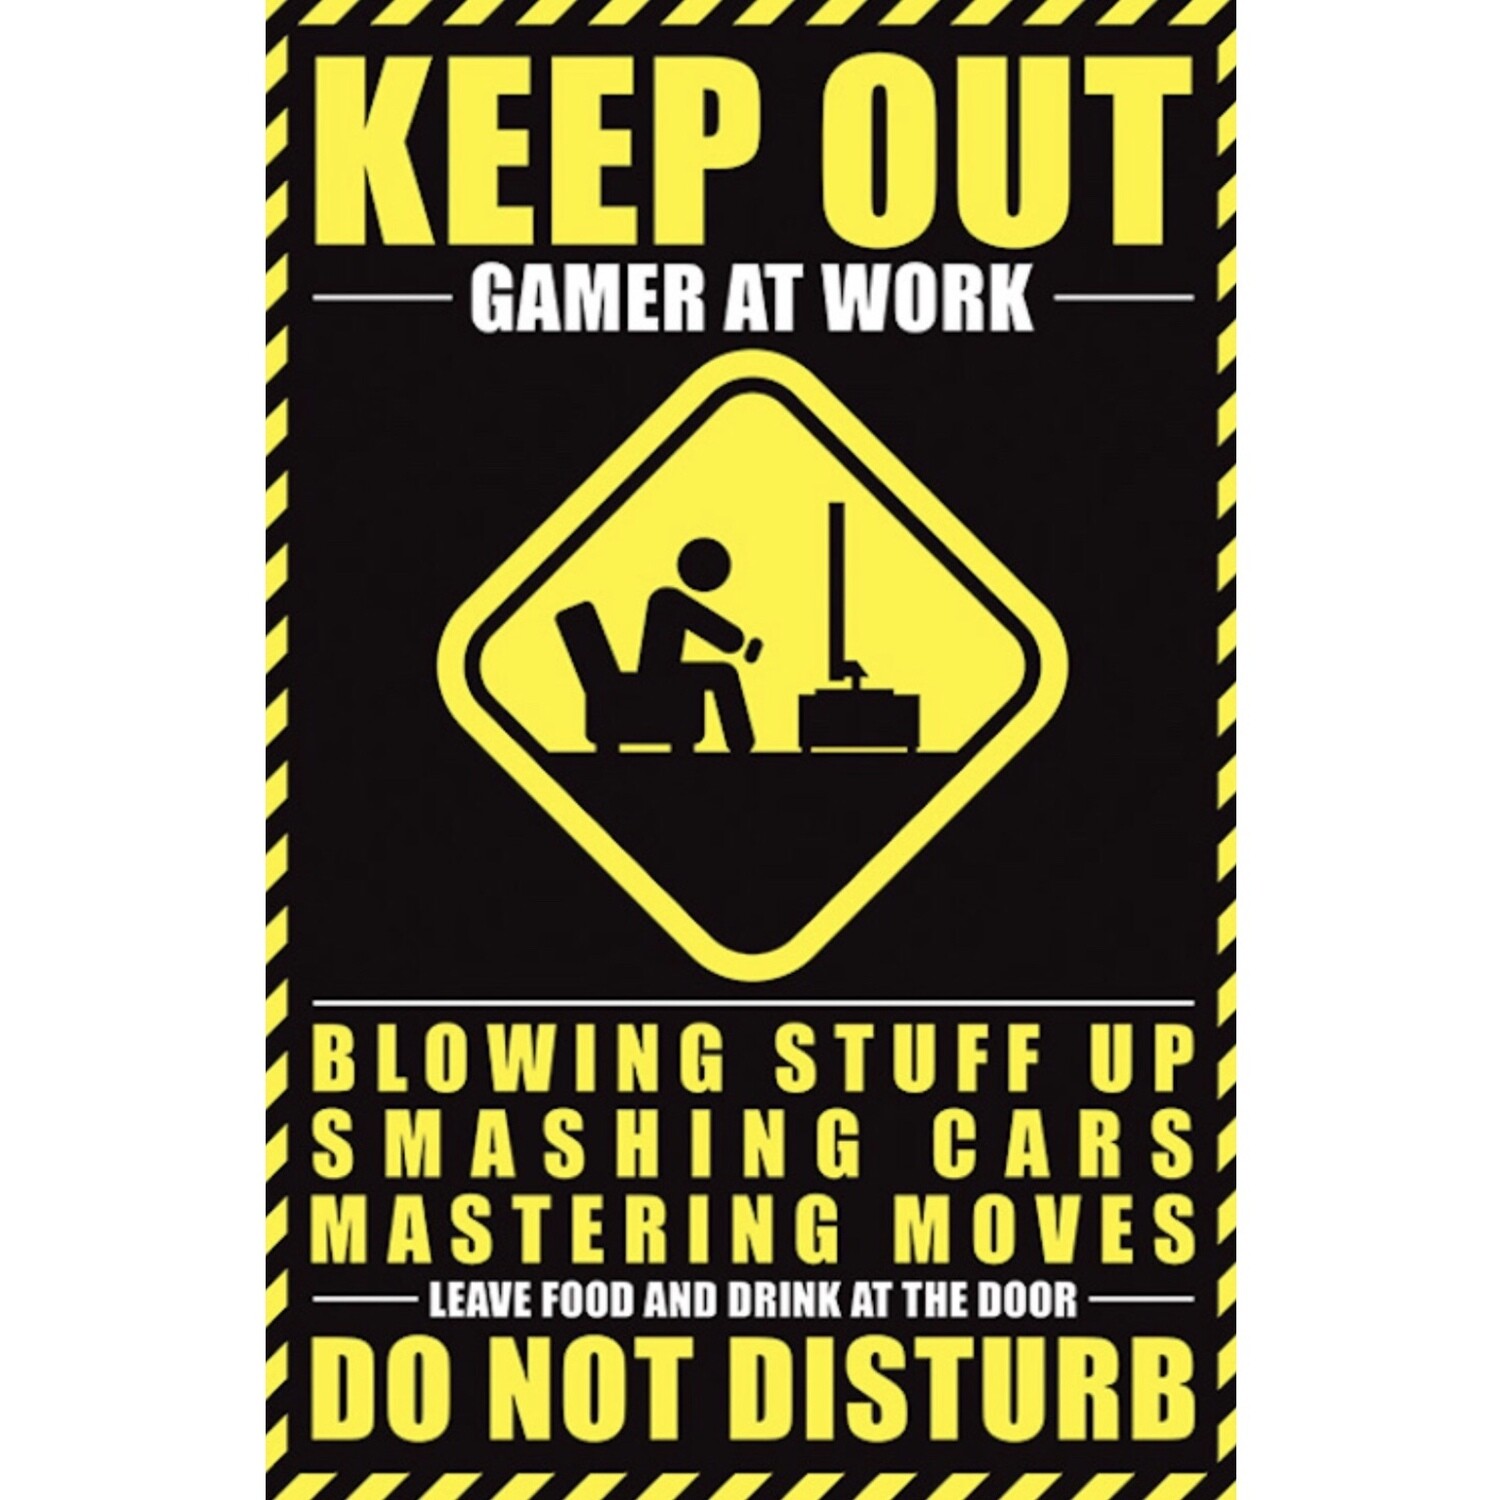 KEEP OUT GAMER AT WORK POSTER